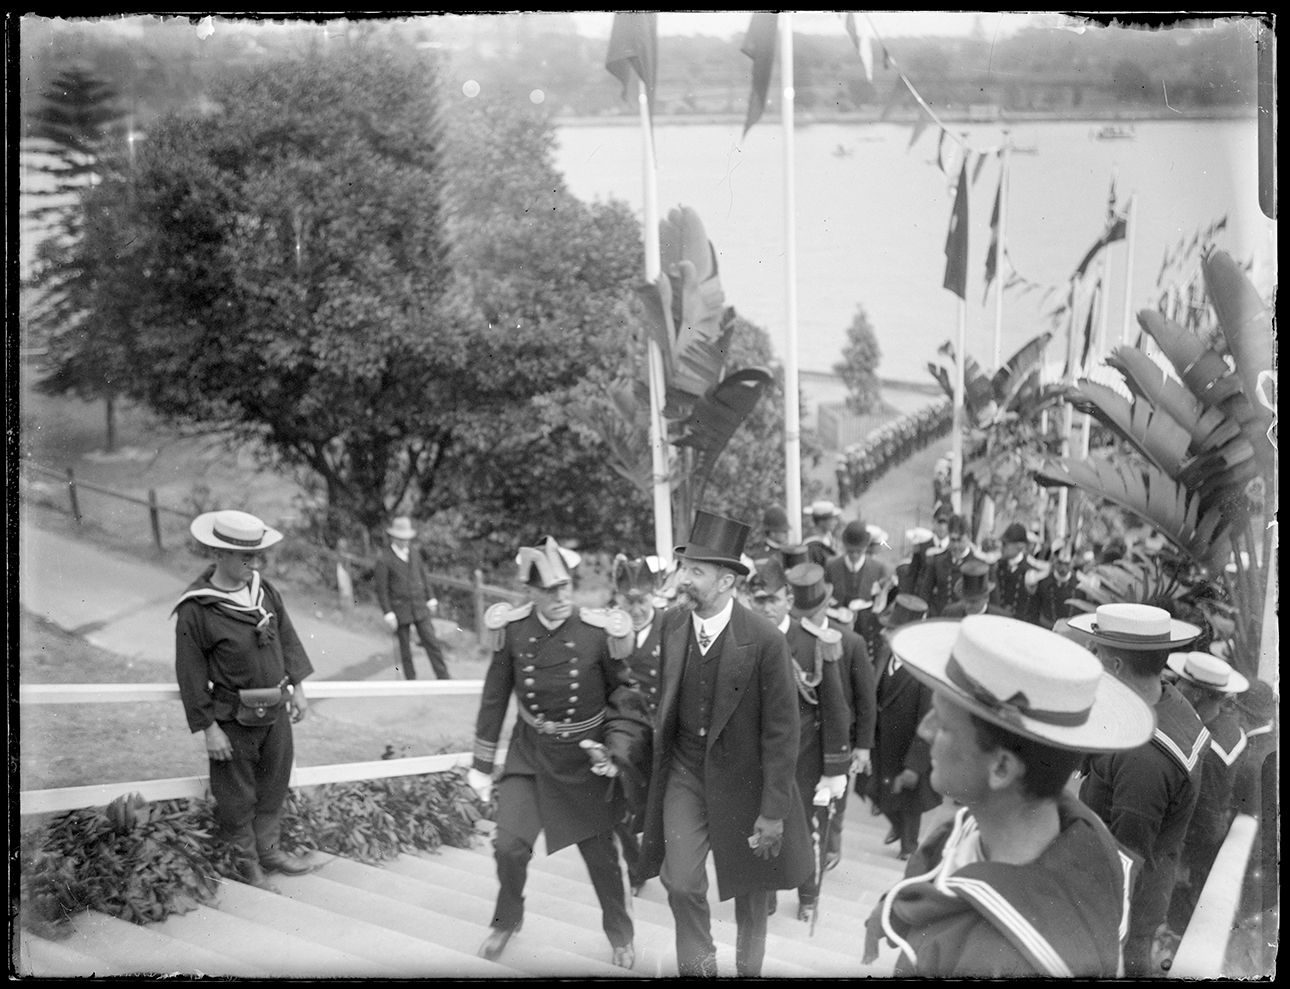 Sailors in boater hats line either side of stairs leading to a harbour and a group of men in top hat and tails walk up with stairs with an admiral in full regalia 